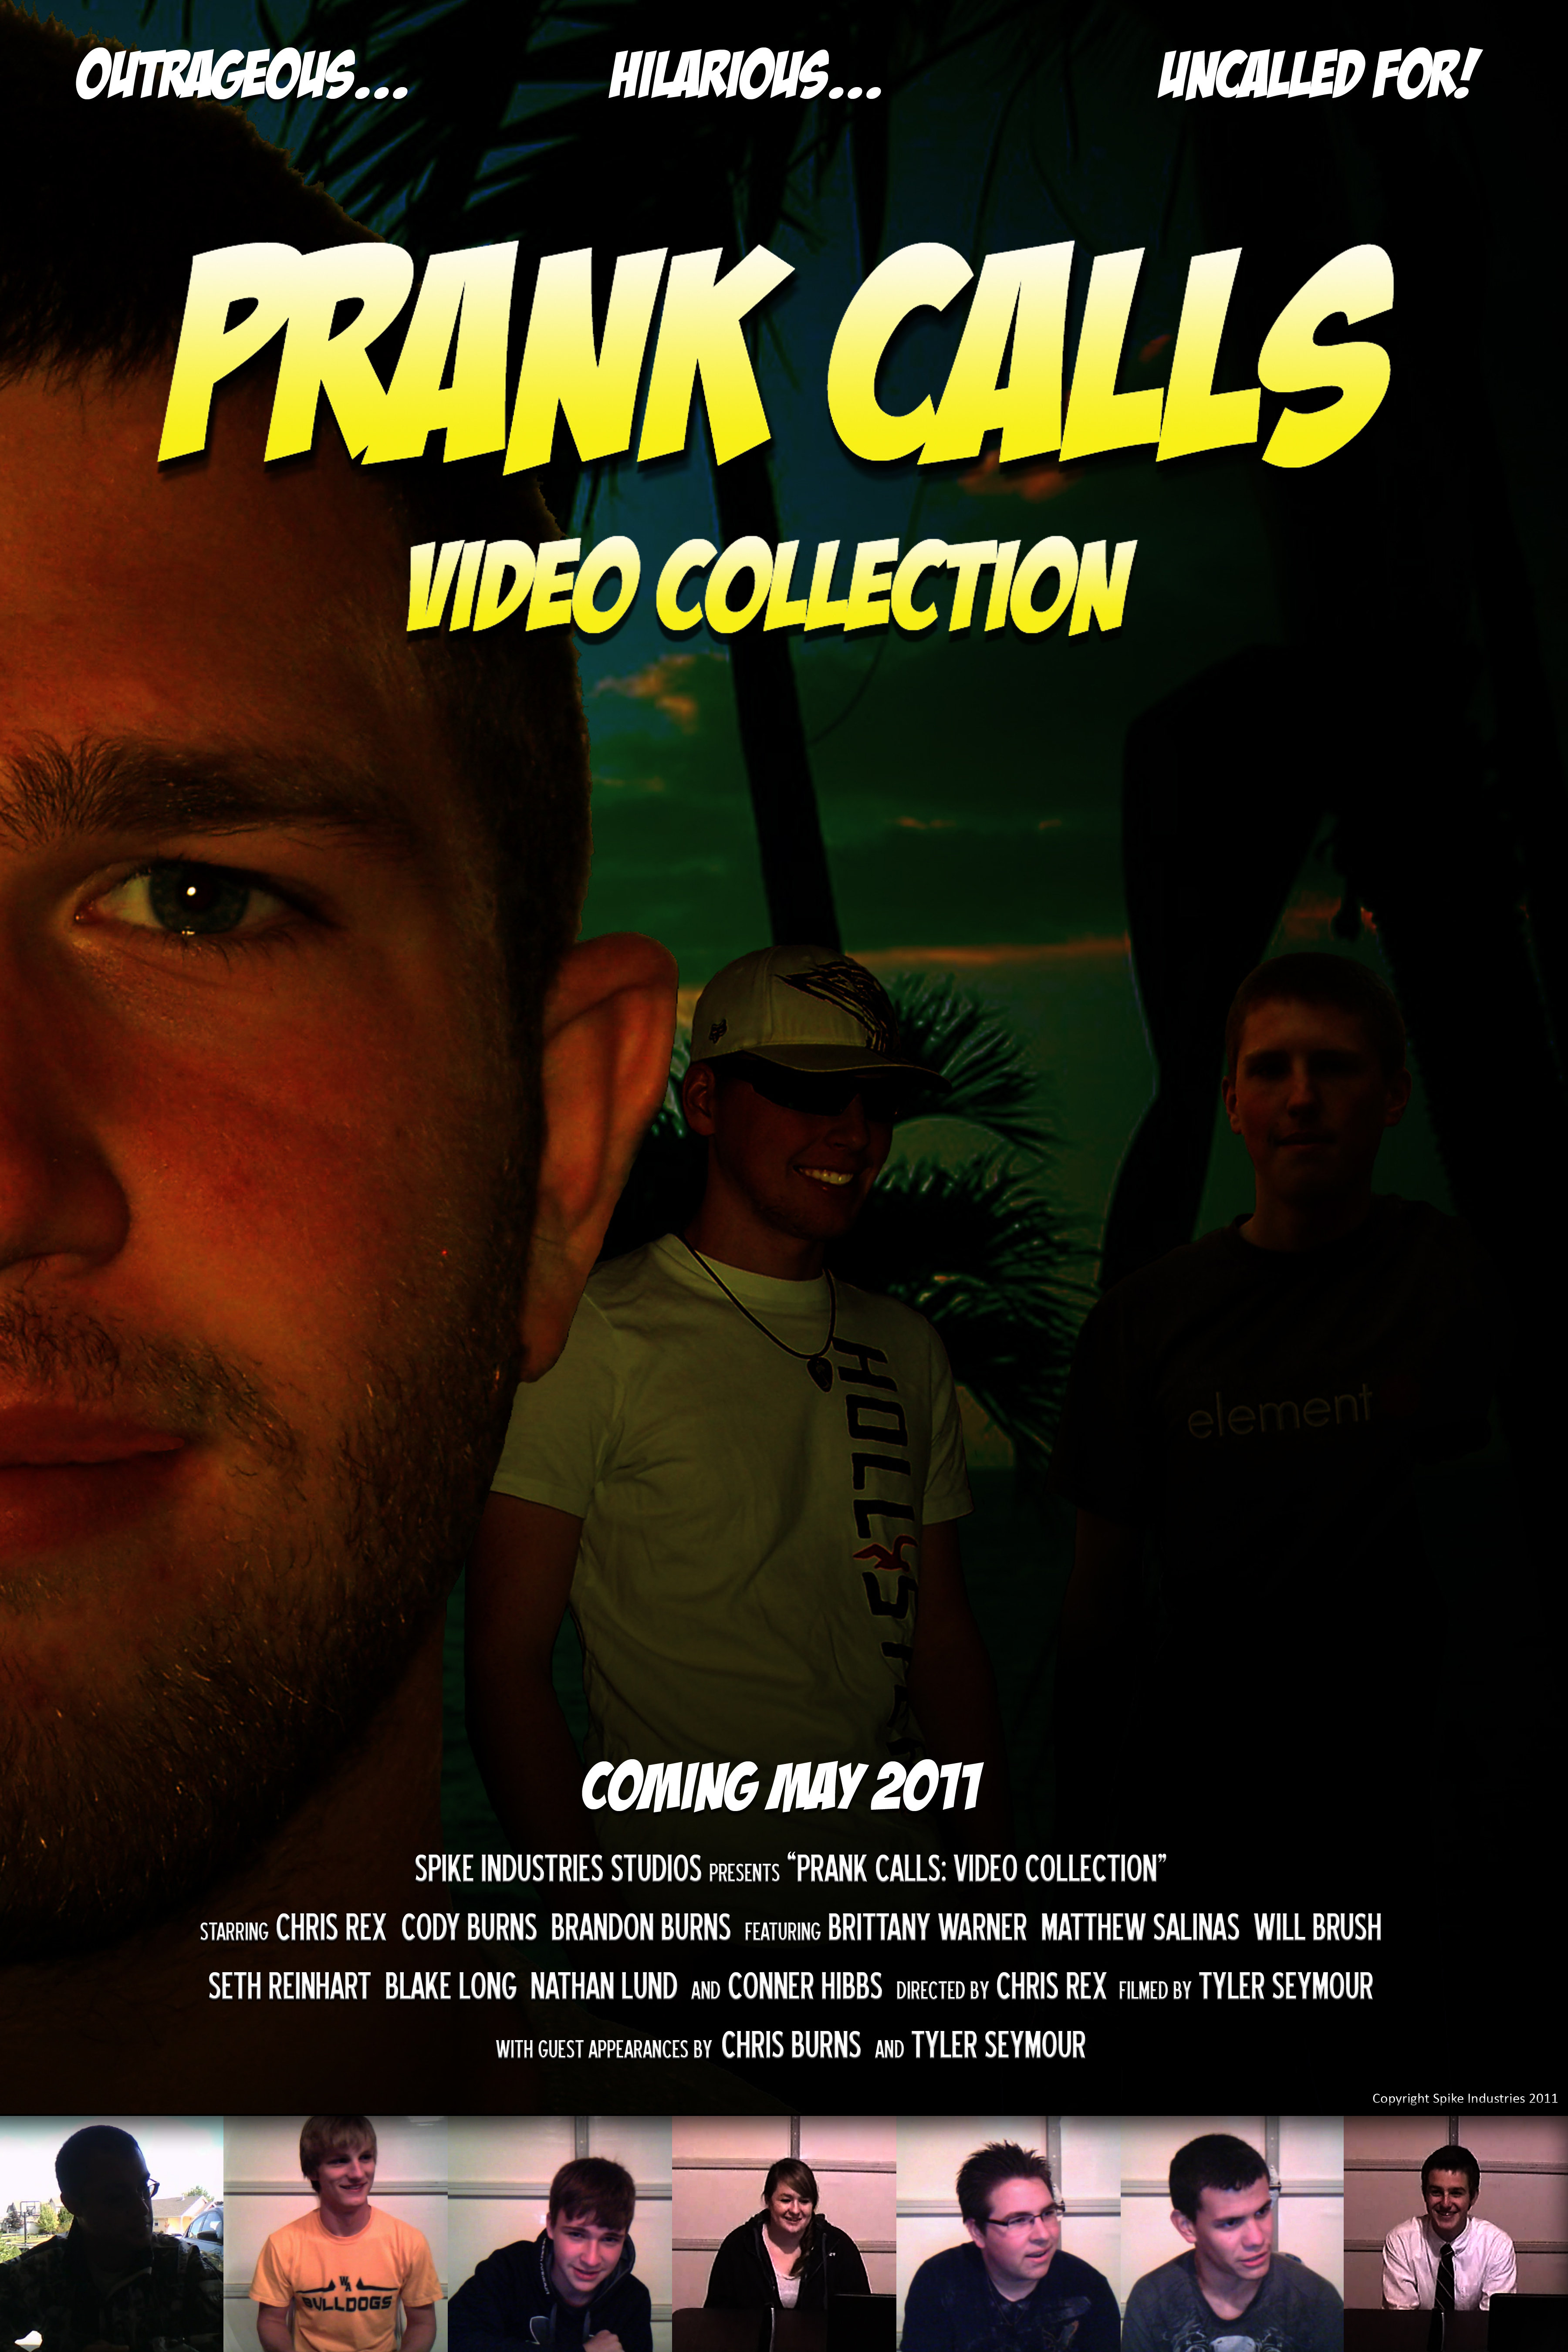 Prank Calls: Video Collection (DVD, May 1 2011)